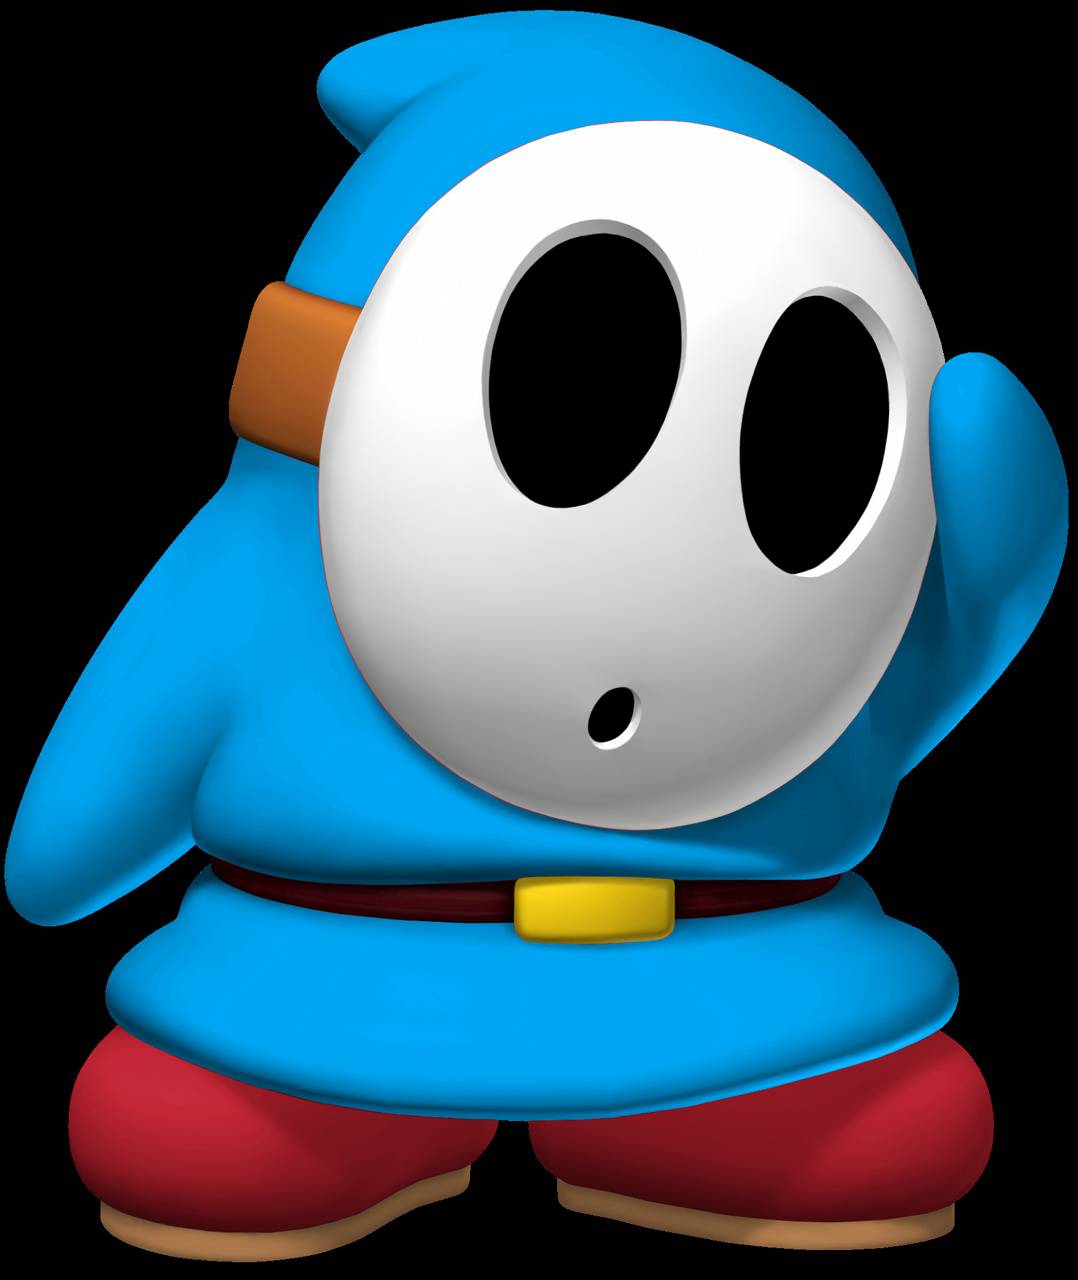 Update more than 51 shy guy wallpaper latest - in.cdgdbentre